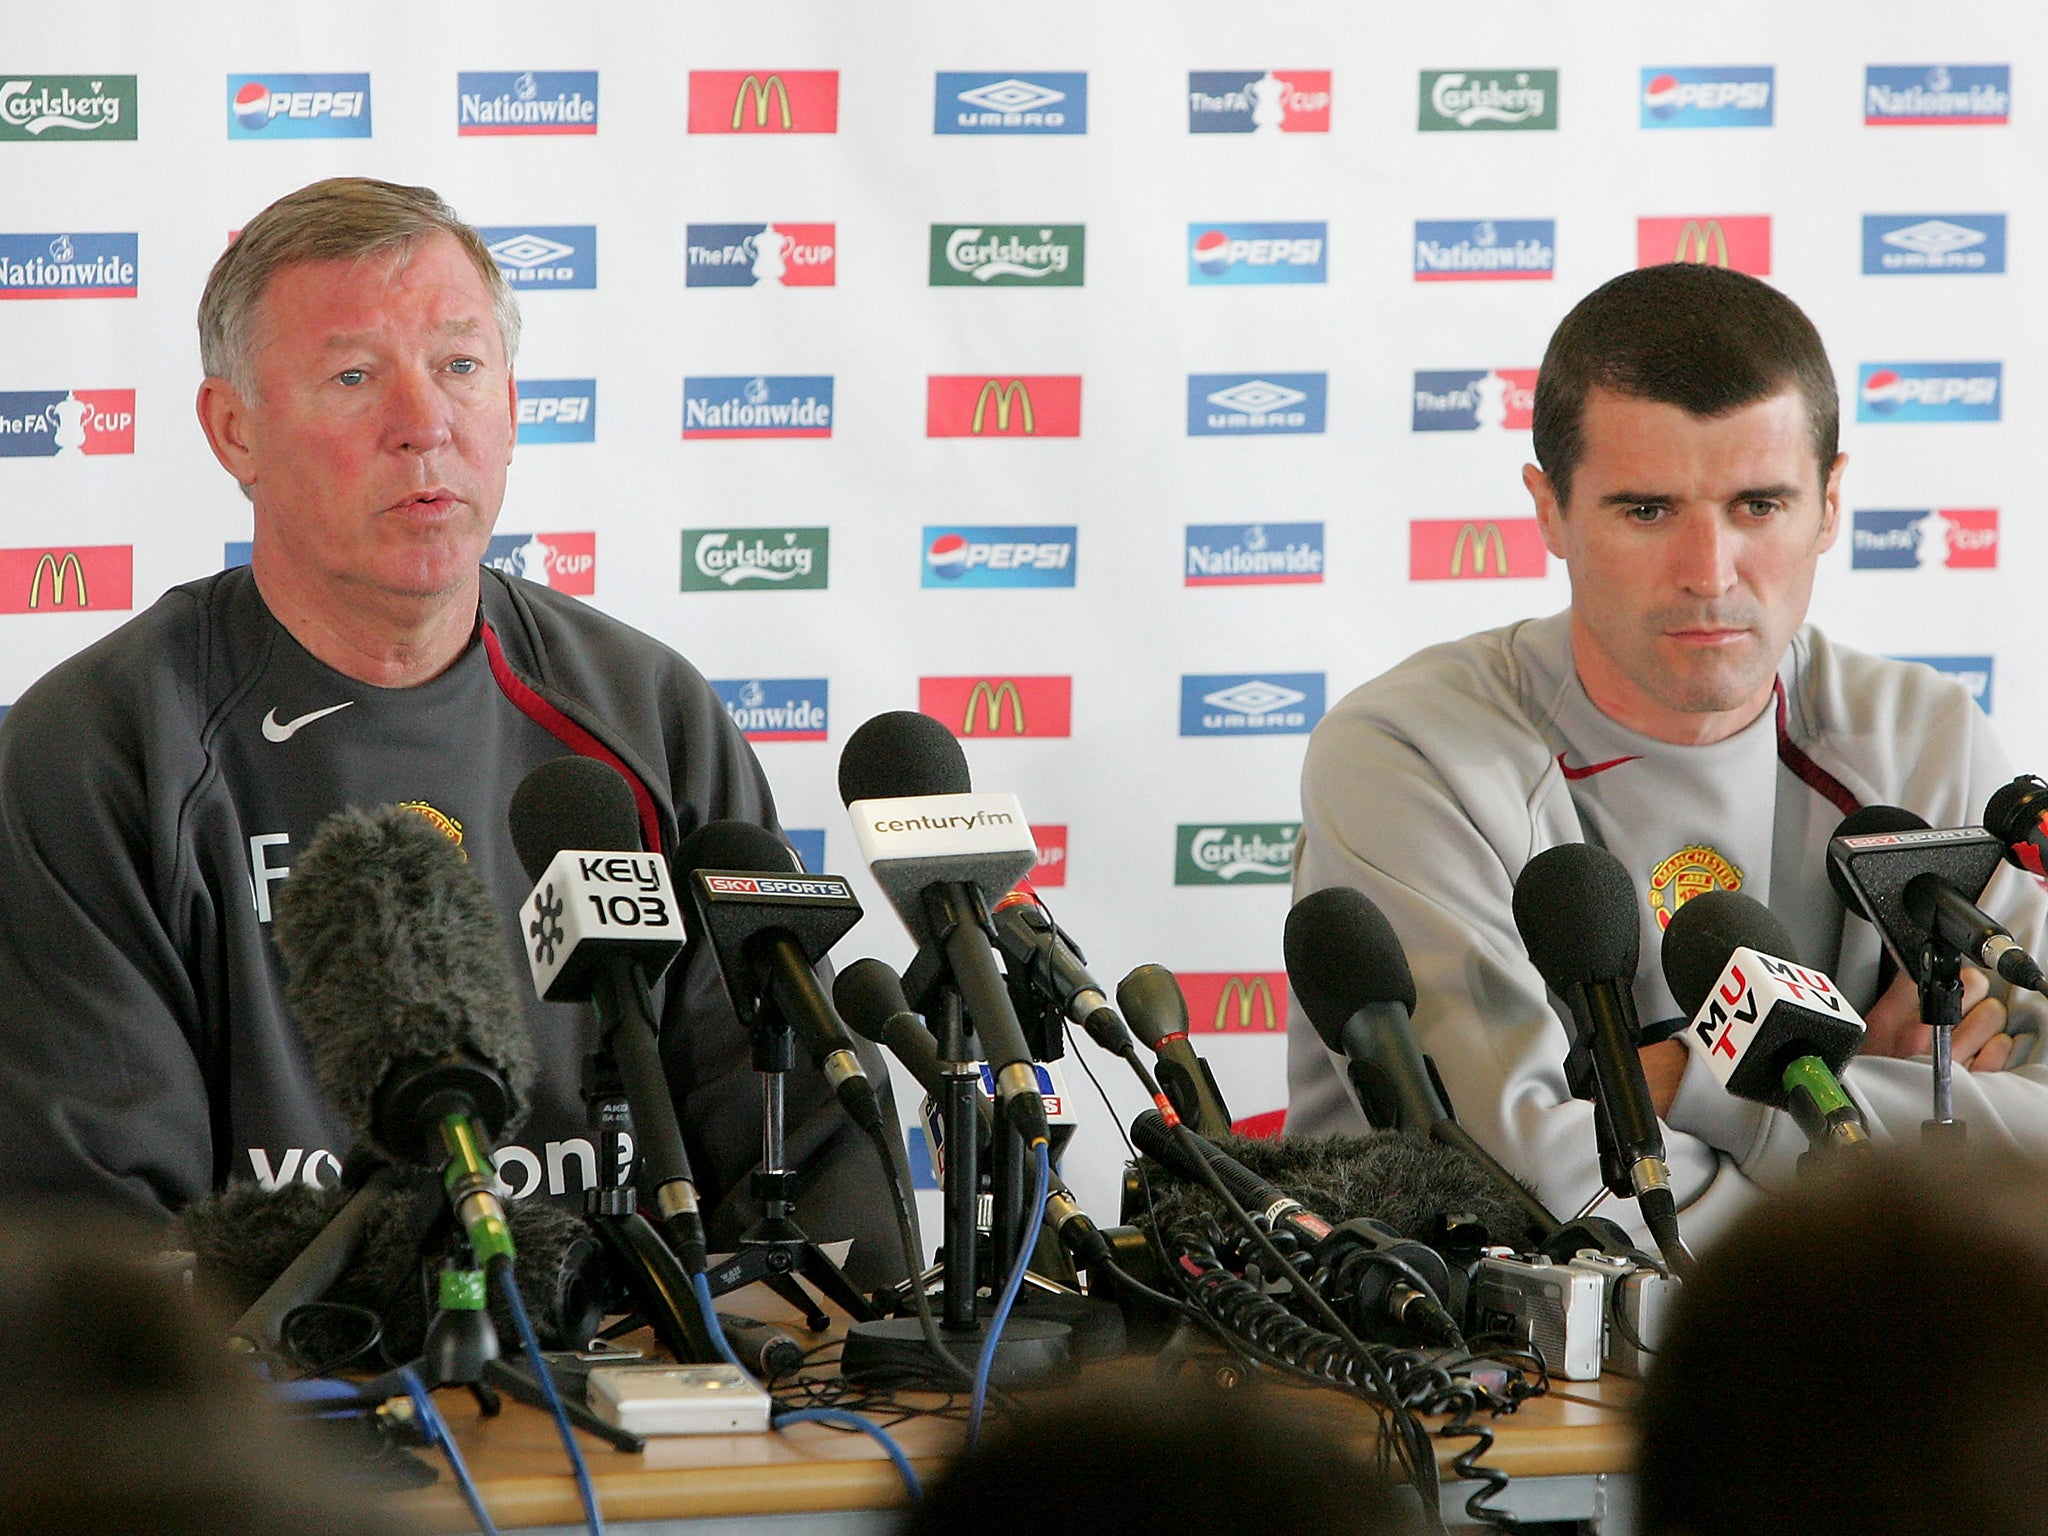 Keane and Ferguson together in 2005